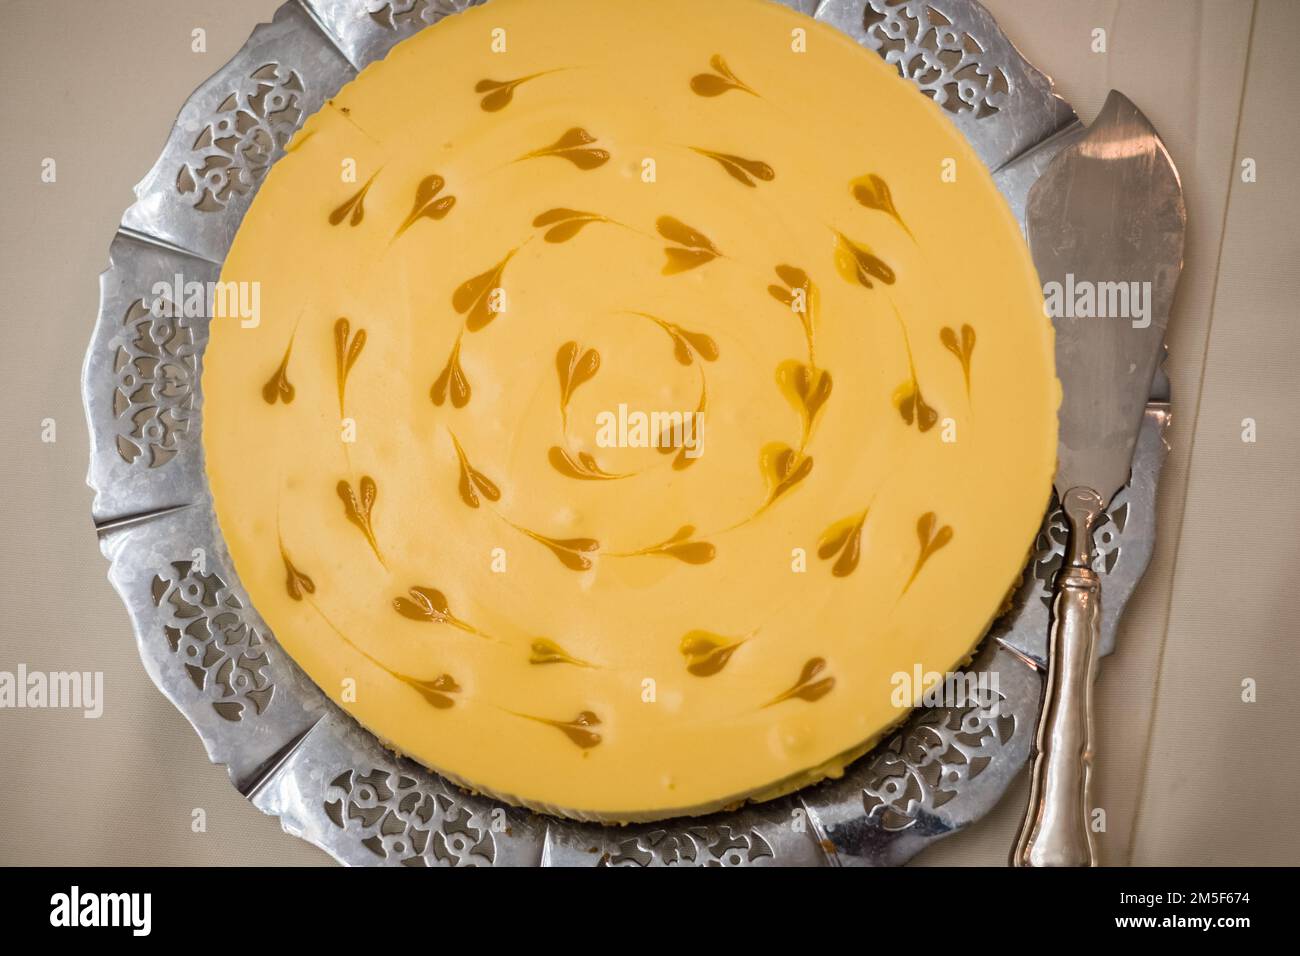 Beautiful mango cake with small mango heart decorations served on a silver tray. Stock Photo